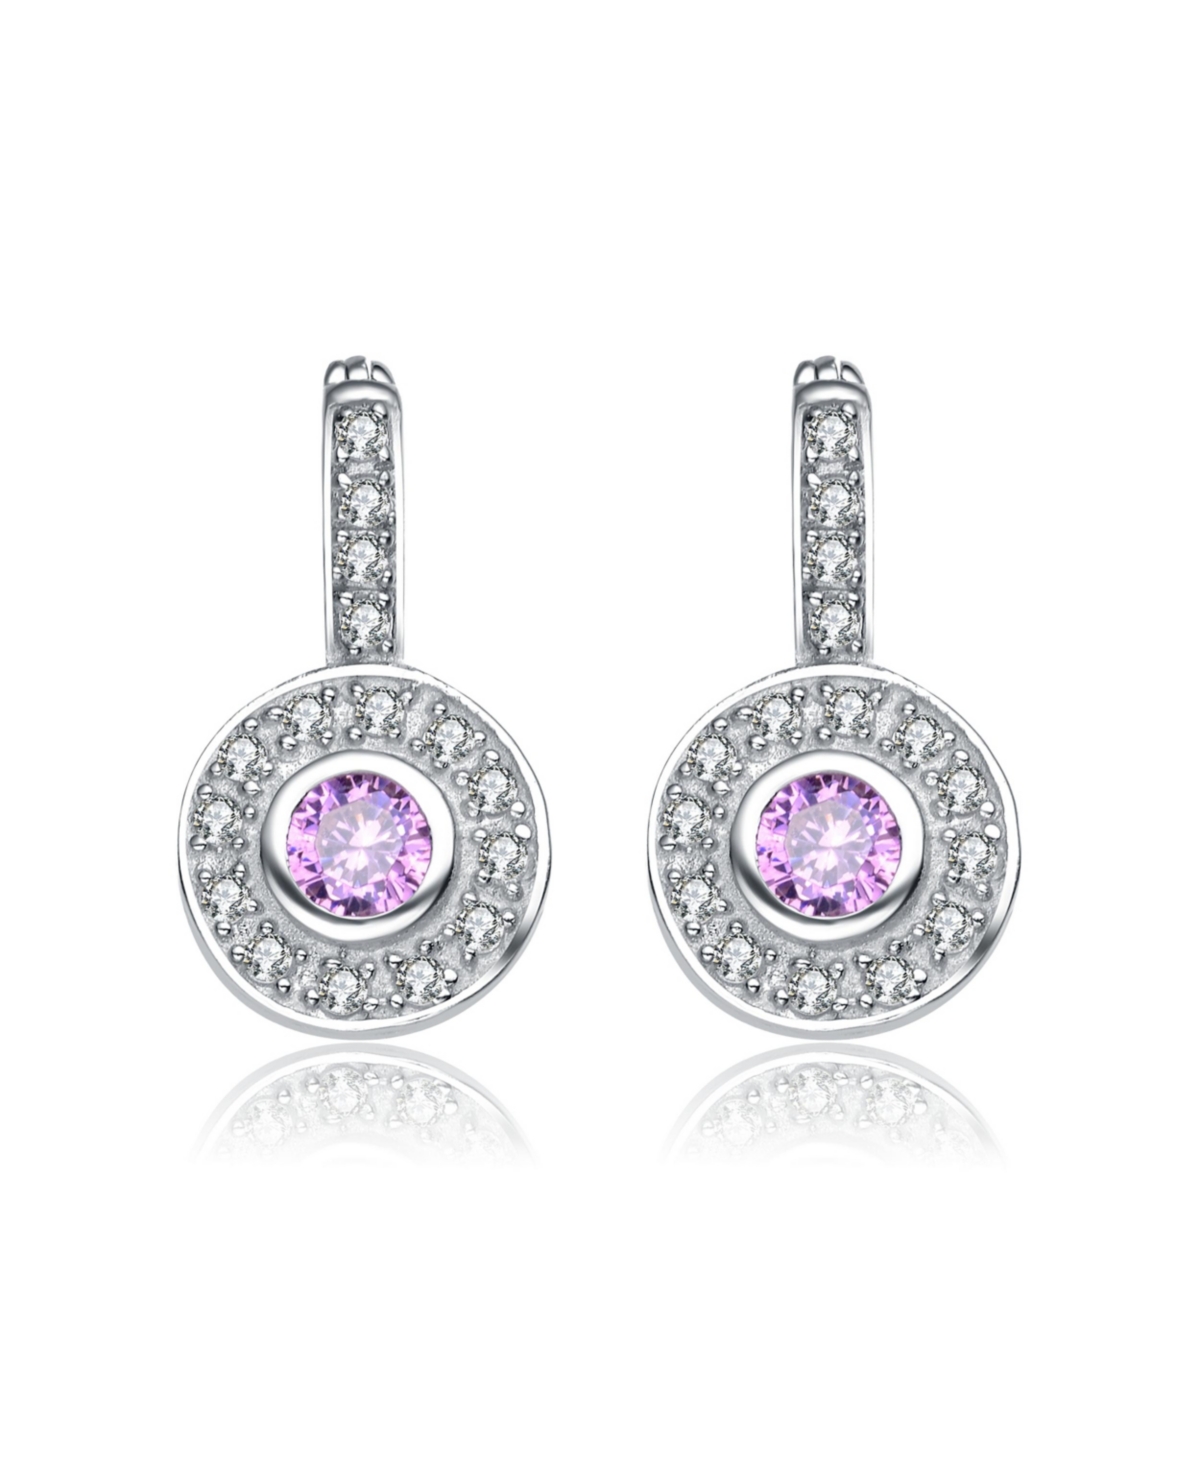 Modern White Gold Plated Round Dangle Earrings with Pink Cubic Zirconia - Pink